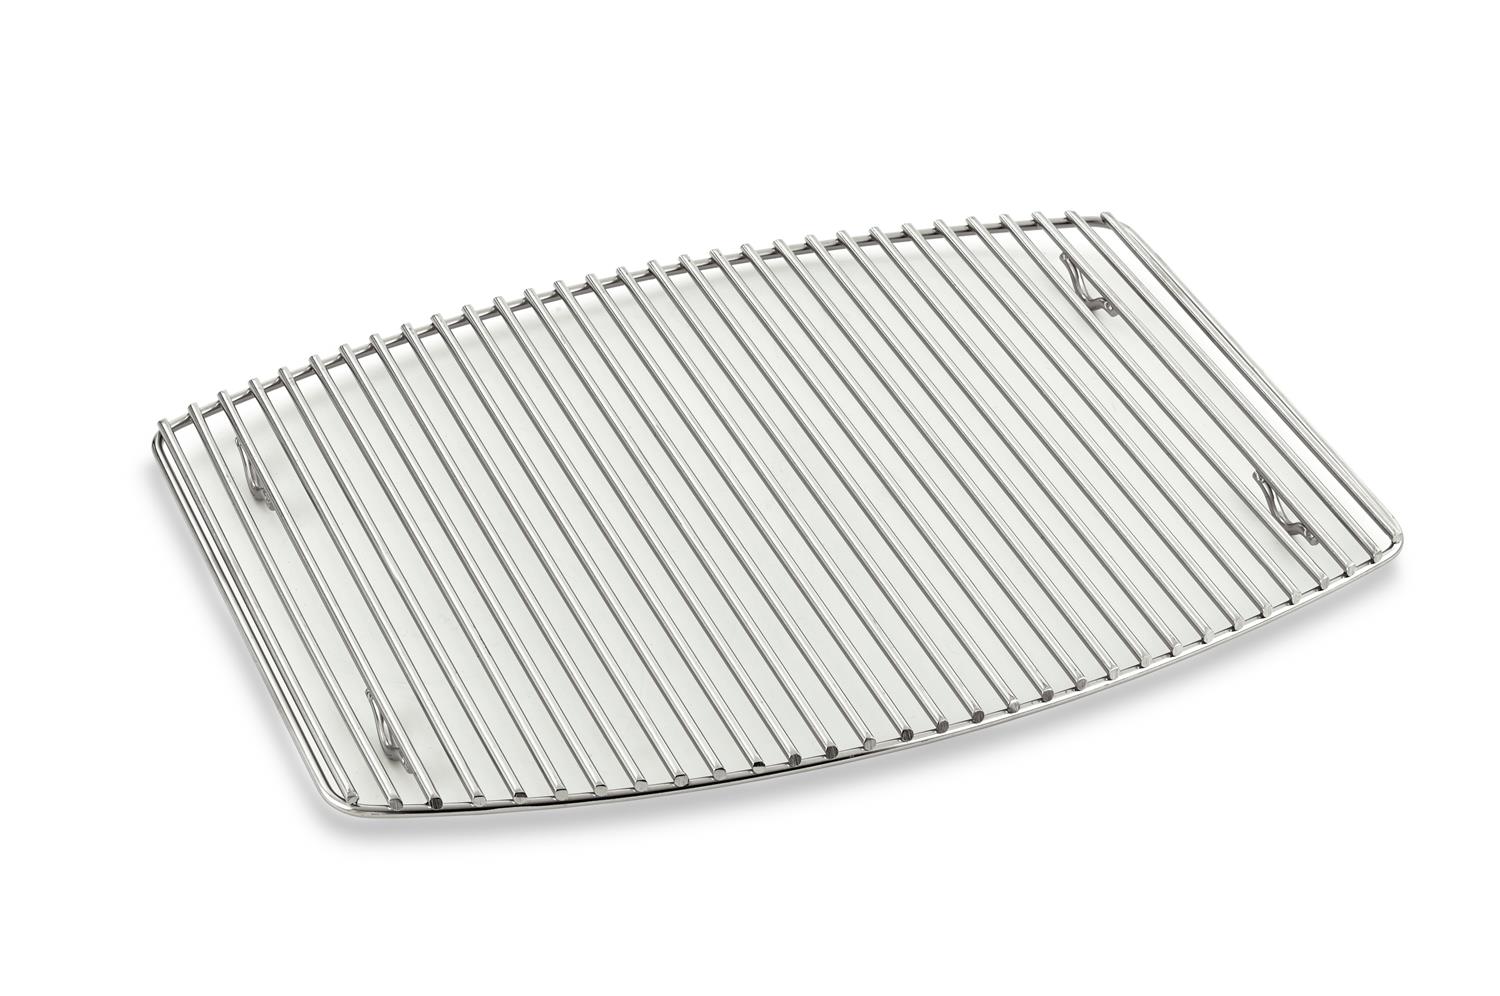 Vollrath 25050 Large replacement wire grate